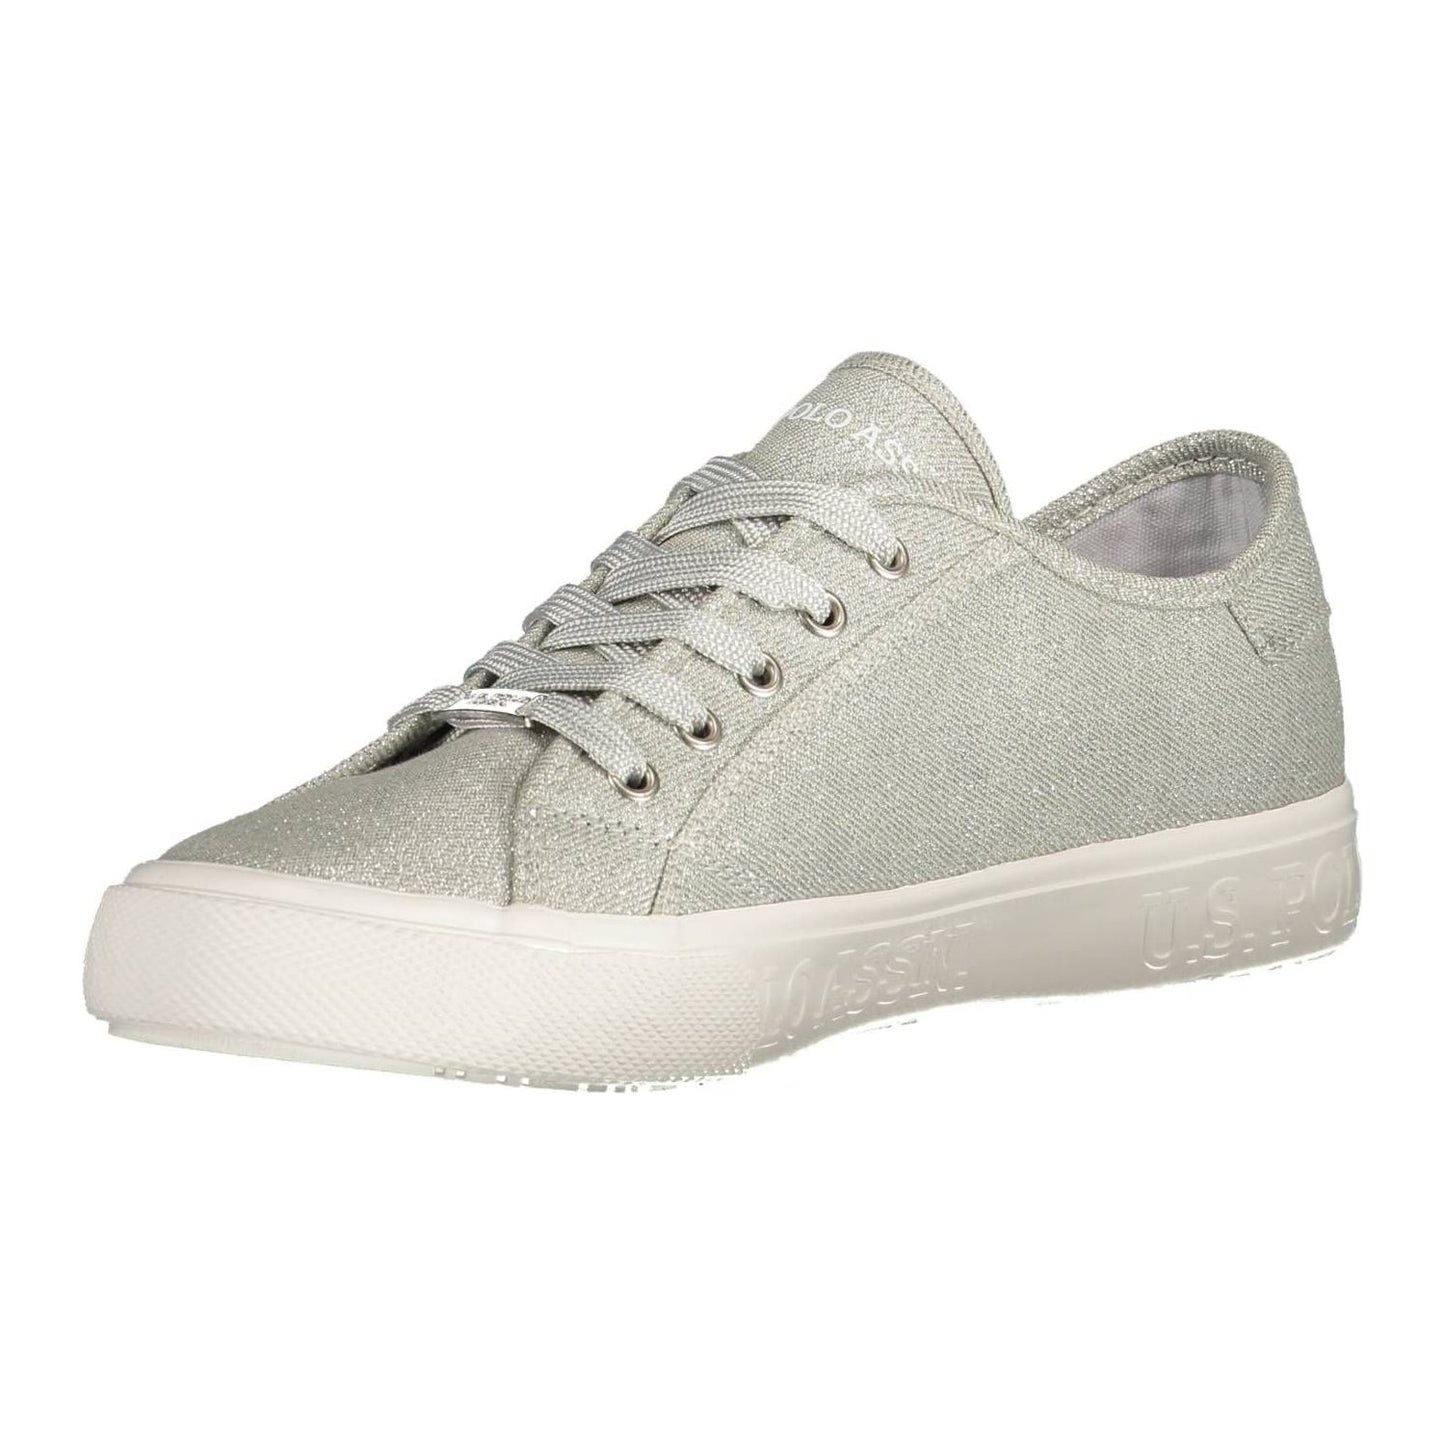 U.S. POLO ASSN. | Silver Lace-up Sporty Sneakers for Modern Women| McRichard Designer Brands   